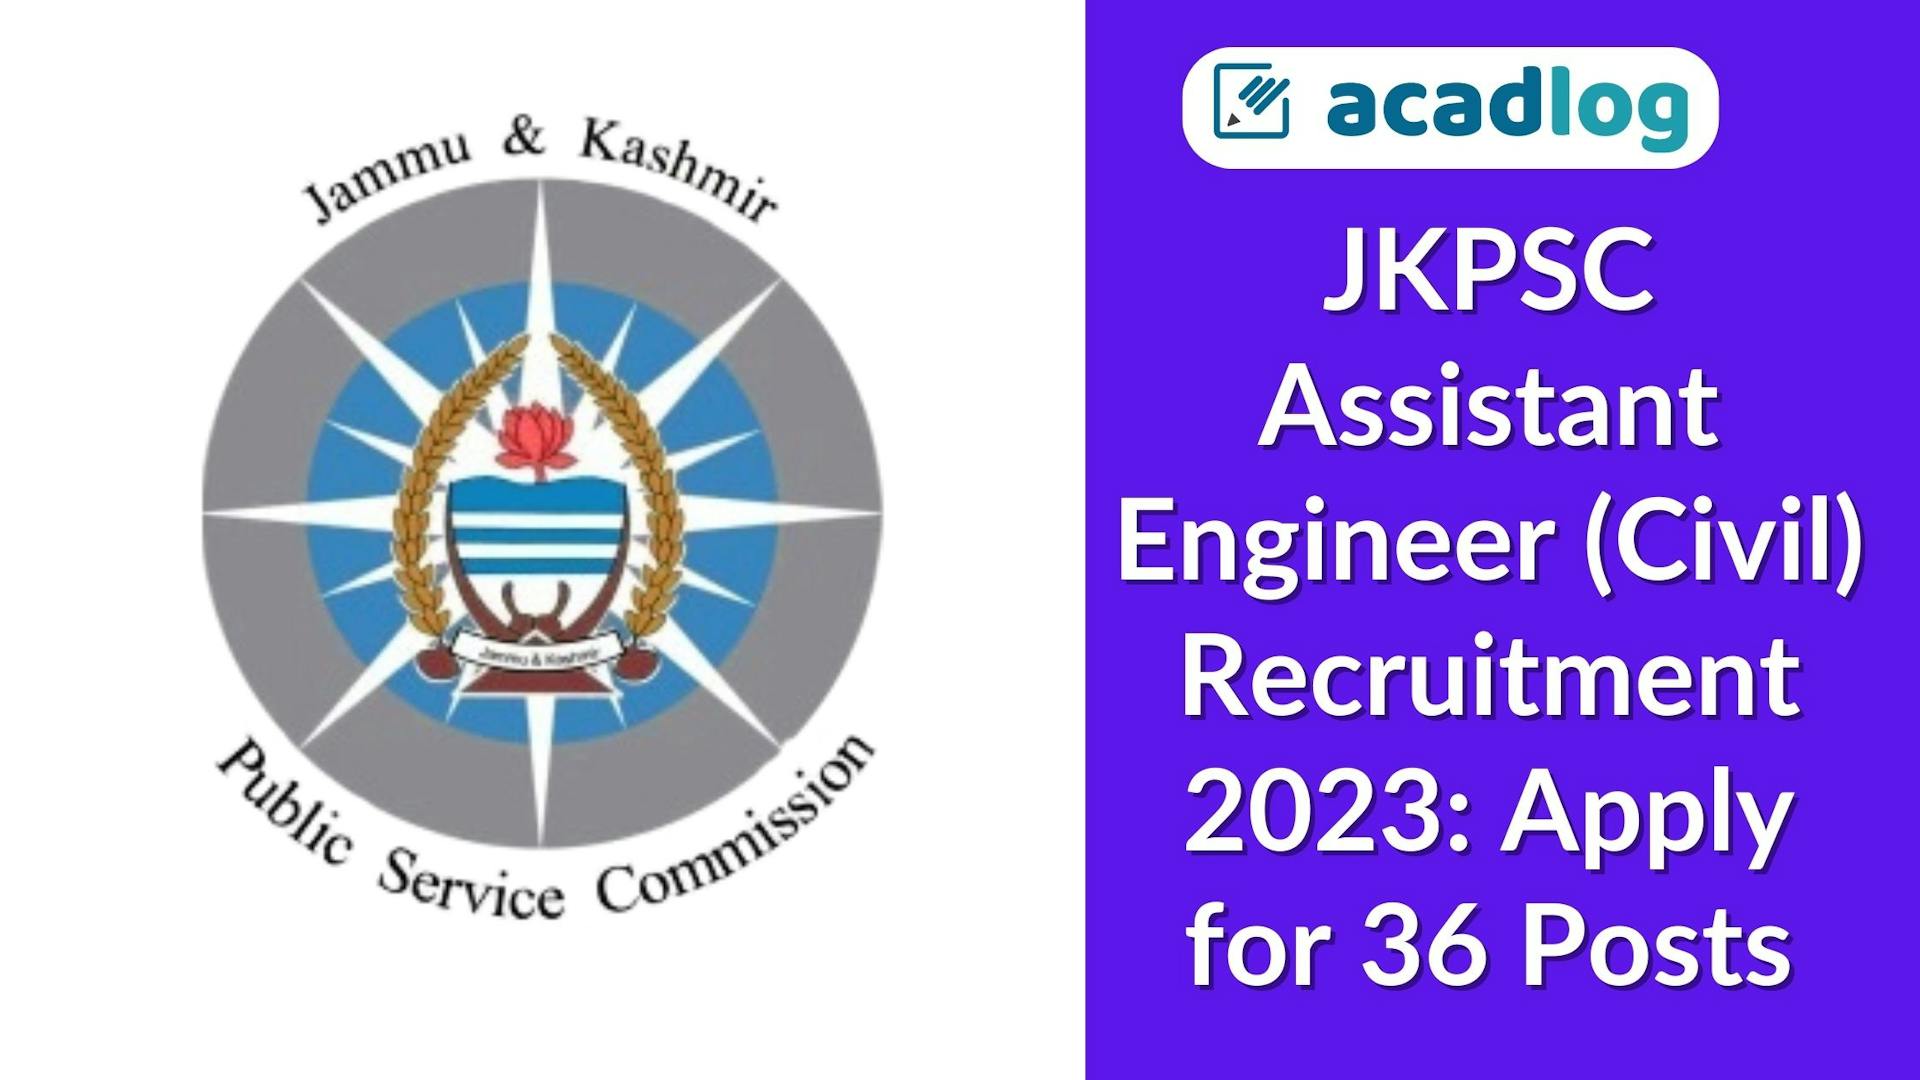 JKPSC Assistant Engineer (Civil) Recruitment 2023: Apply for 36 Posts